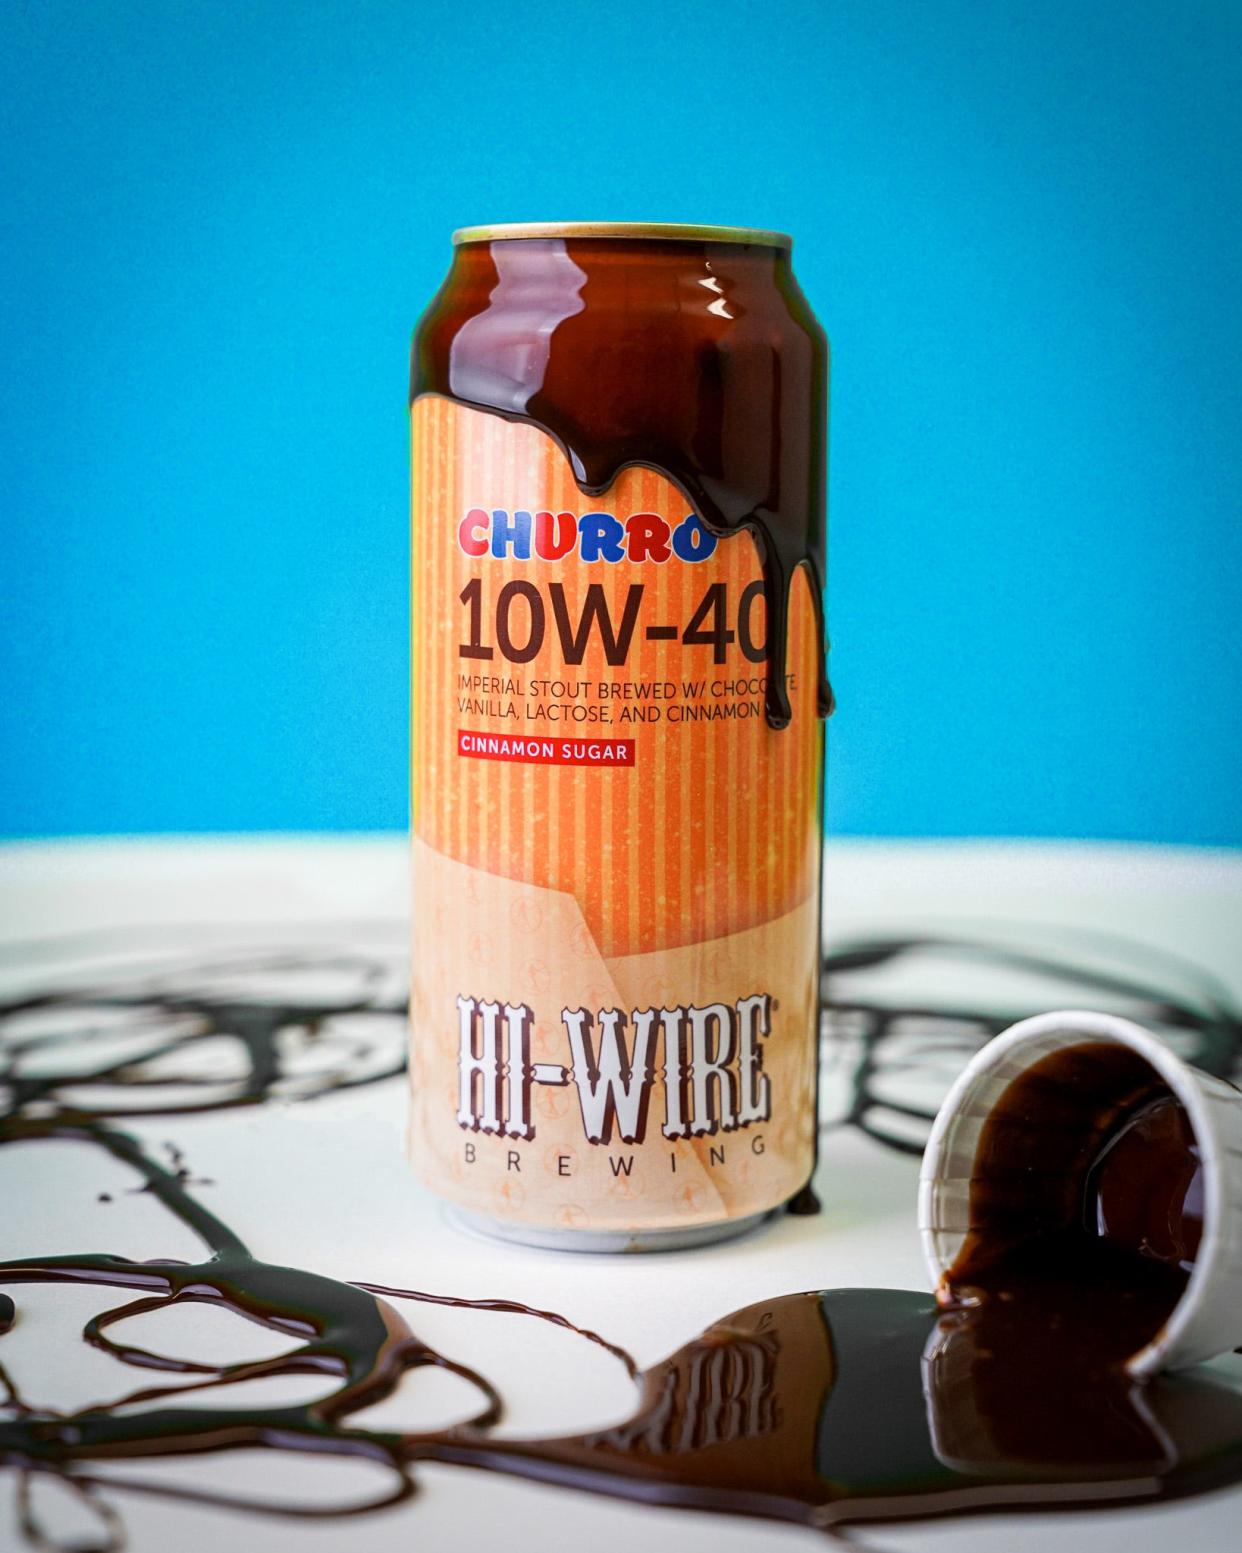 Hi-Wire Brewing Co. received the silver medal in the 2024 World Beer Cup in the category of Dessert Stout or Pastry Stout for its Churro 10W-40 Imperial Stout.